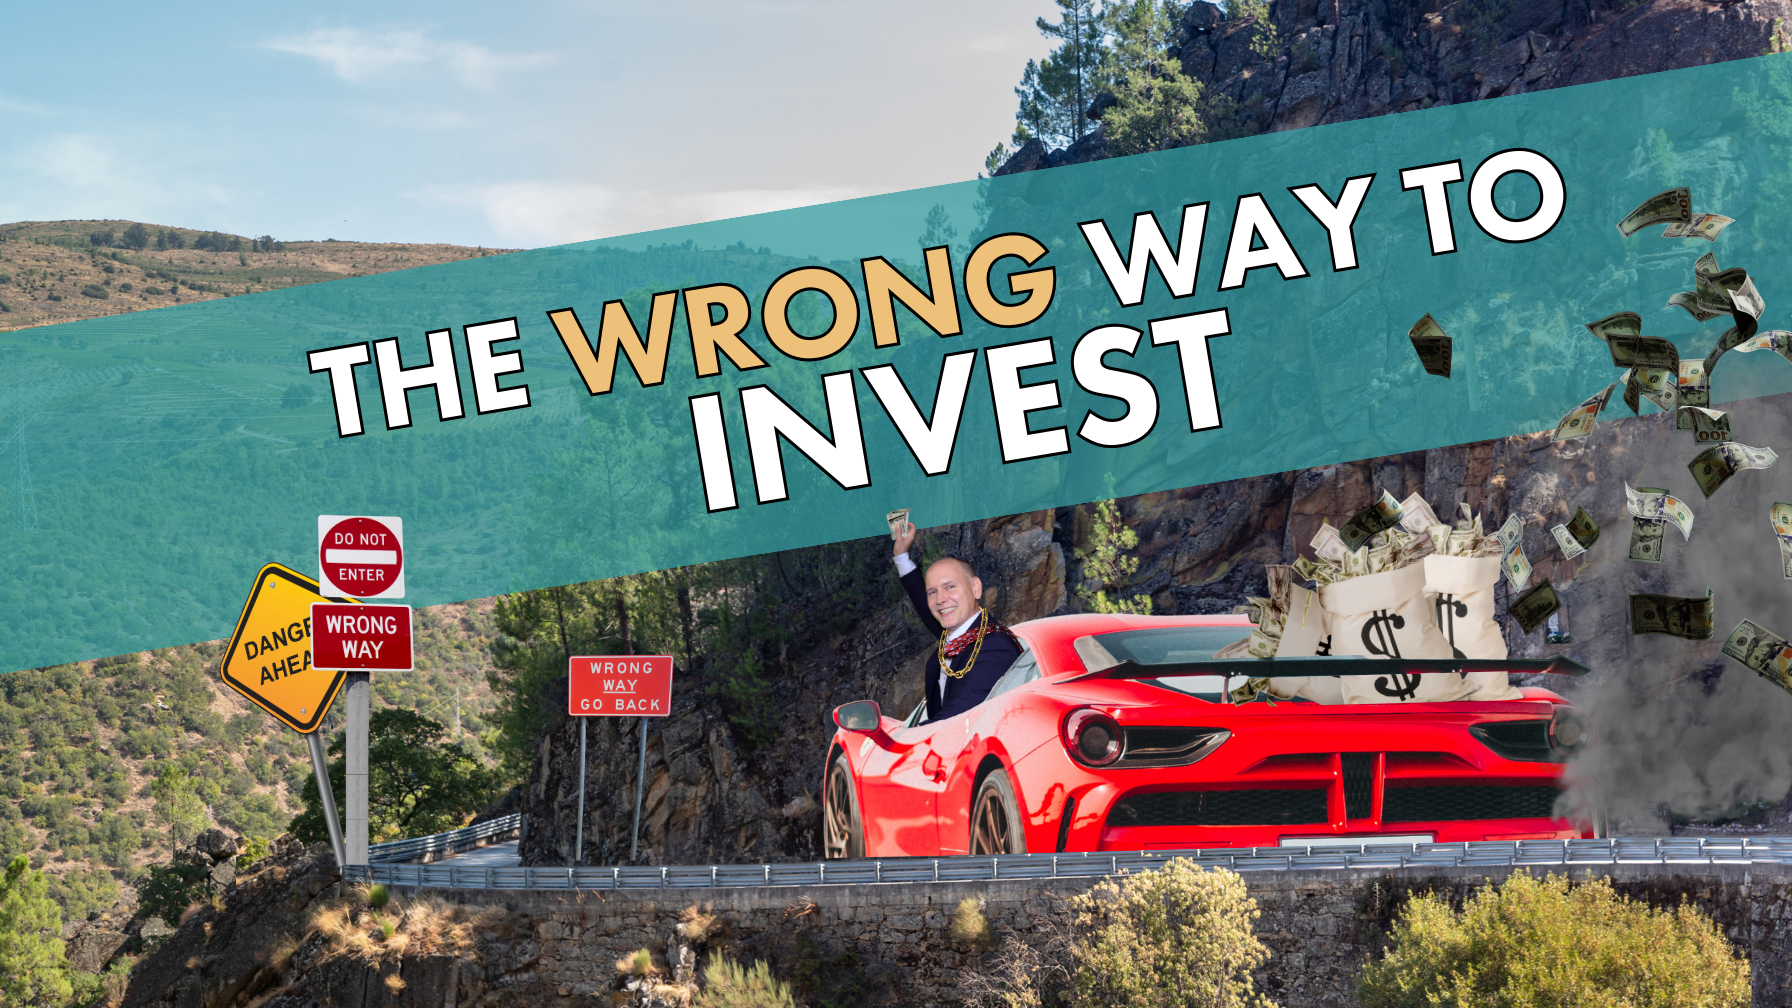 The WRONG way to Invest